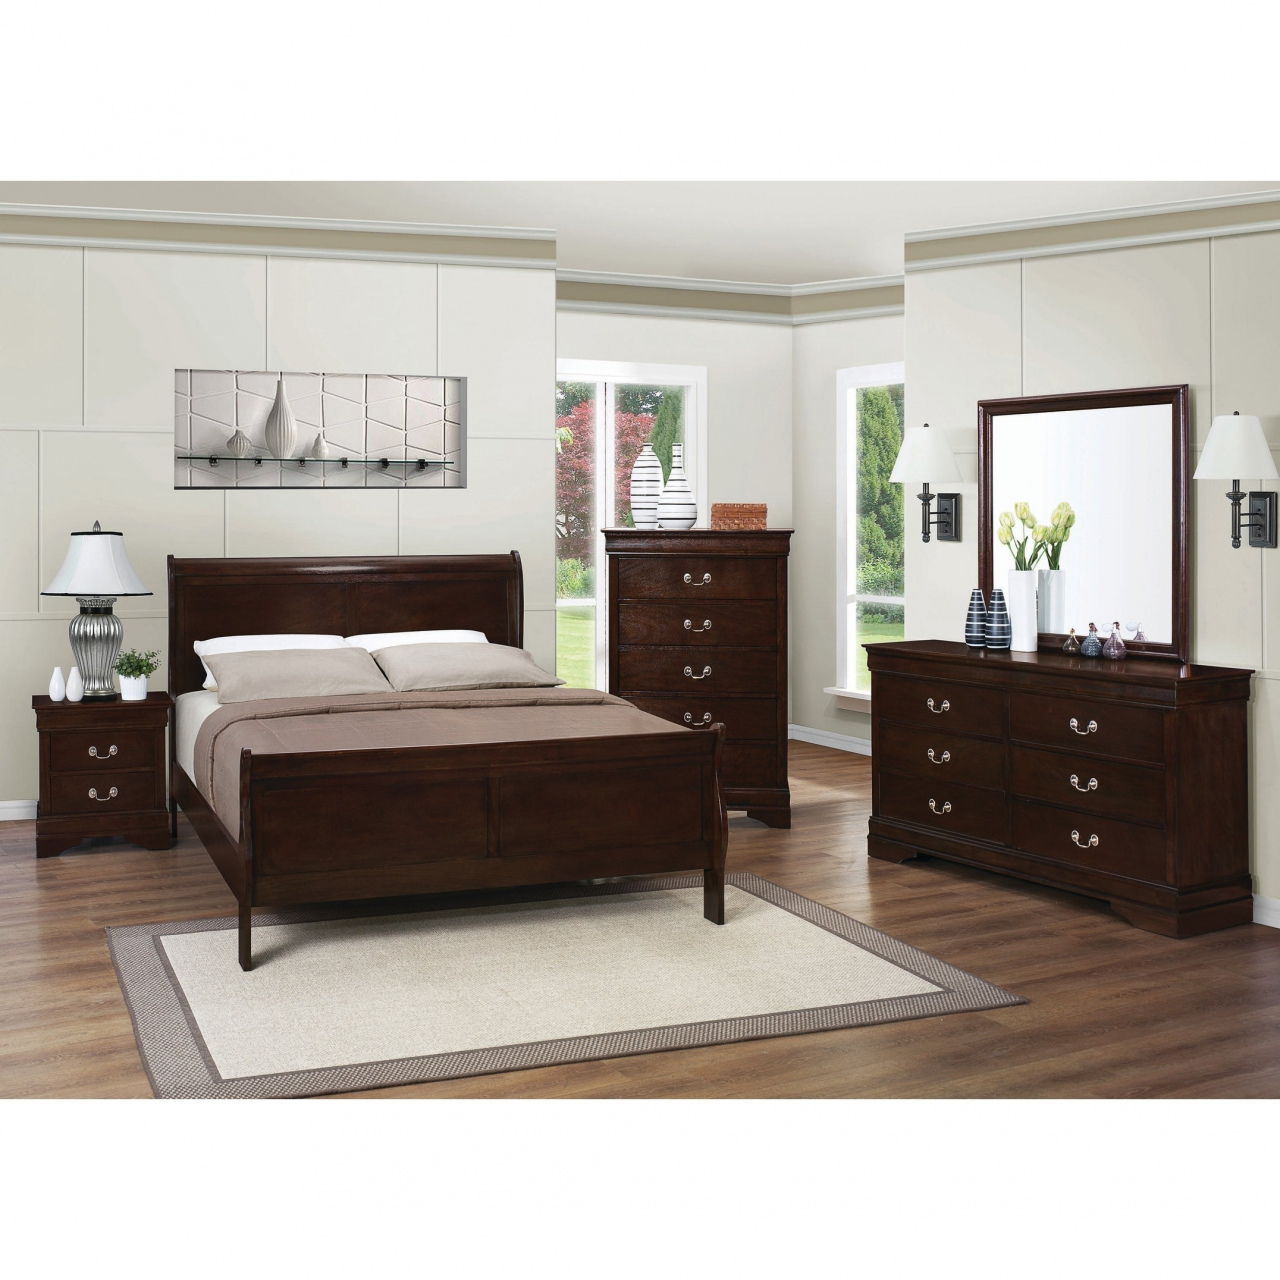 7 Piece Queen Bedroom Furniture Sets With Drawer On Bed And within dimensions 1280 X 1280